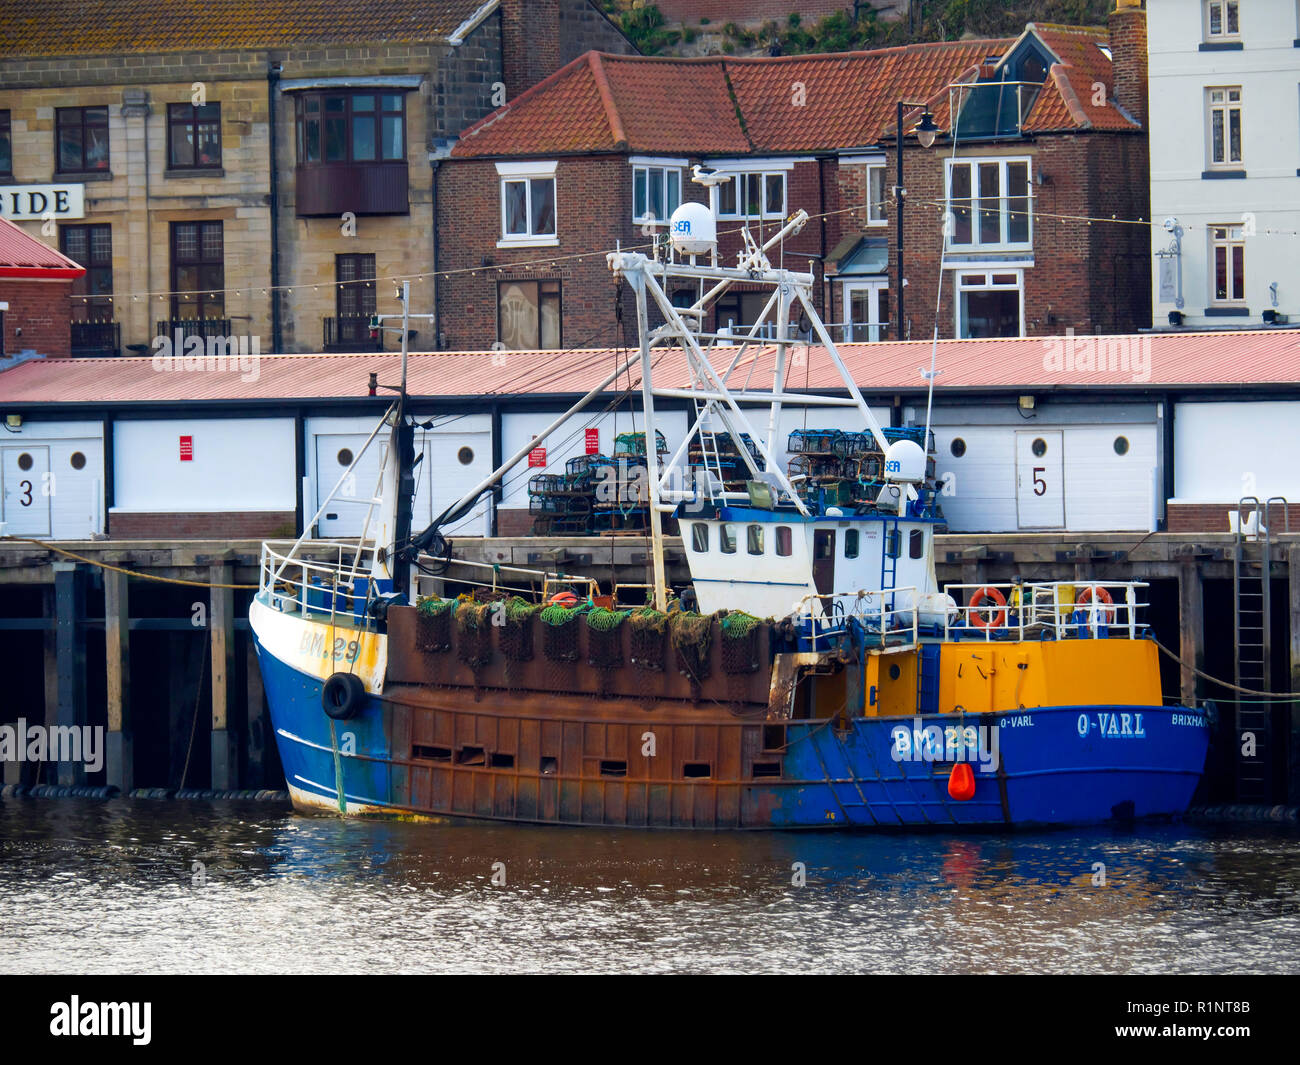 Blue specialised Scallop fishing boat O Varl of Brixhan BM 29 moored at the fish quay Whitby, North Yorkshire. Stock Photo